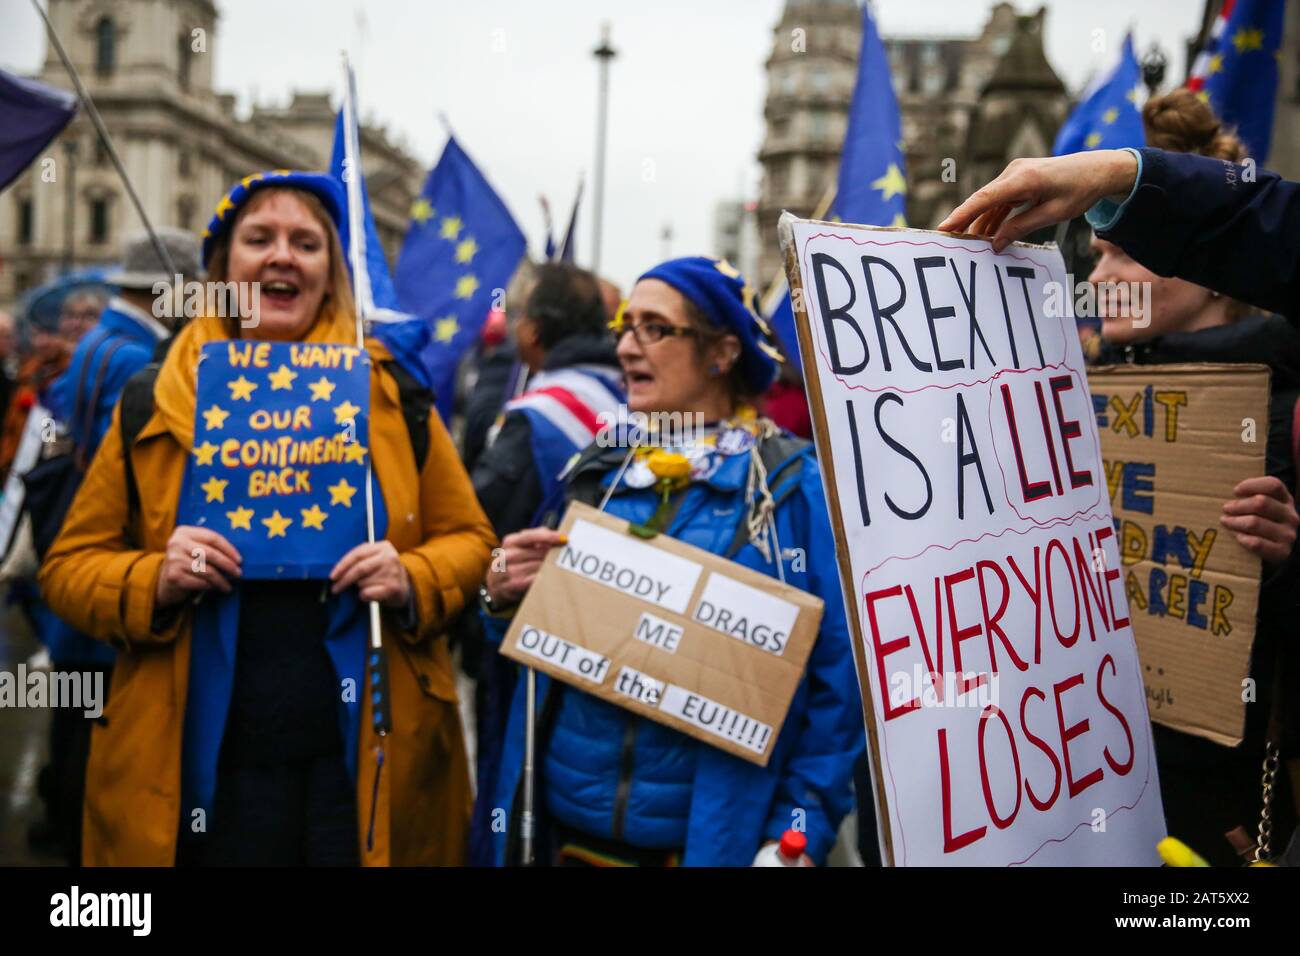 Pro-remain supporters holding placards protest outside Houses of Parliament on the eve of Brexit Day.Pro-remain supporters with EU flags protest outside Houses of Parliament on the eve of Brexit Day. Britain will officially leave the European Union at 11pm (GMT) on 31 January 2020 and will cease to be a state member. Under the terms of the Withdrawal Agreement, UK will enter a transitional period and will abide by EU rules despite not being a member. Stock Photo